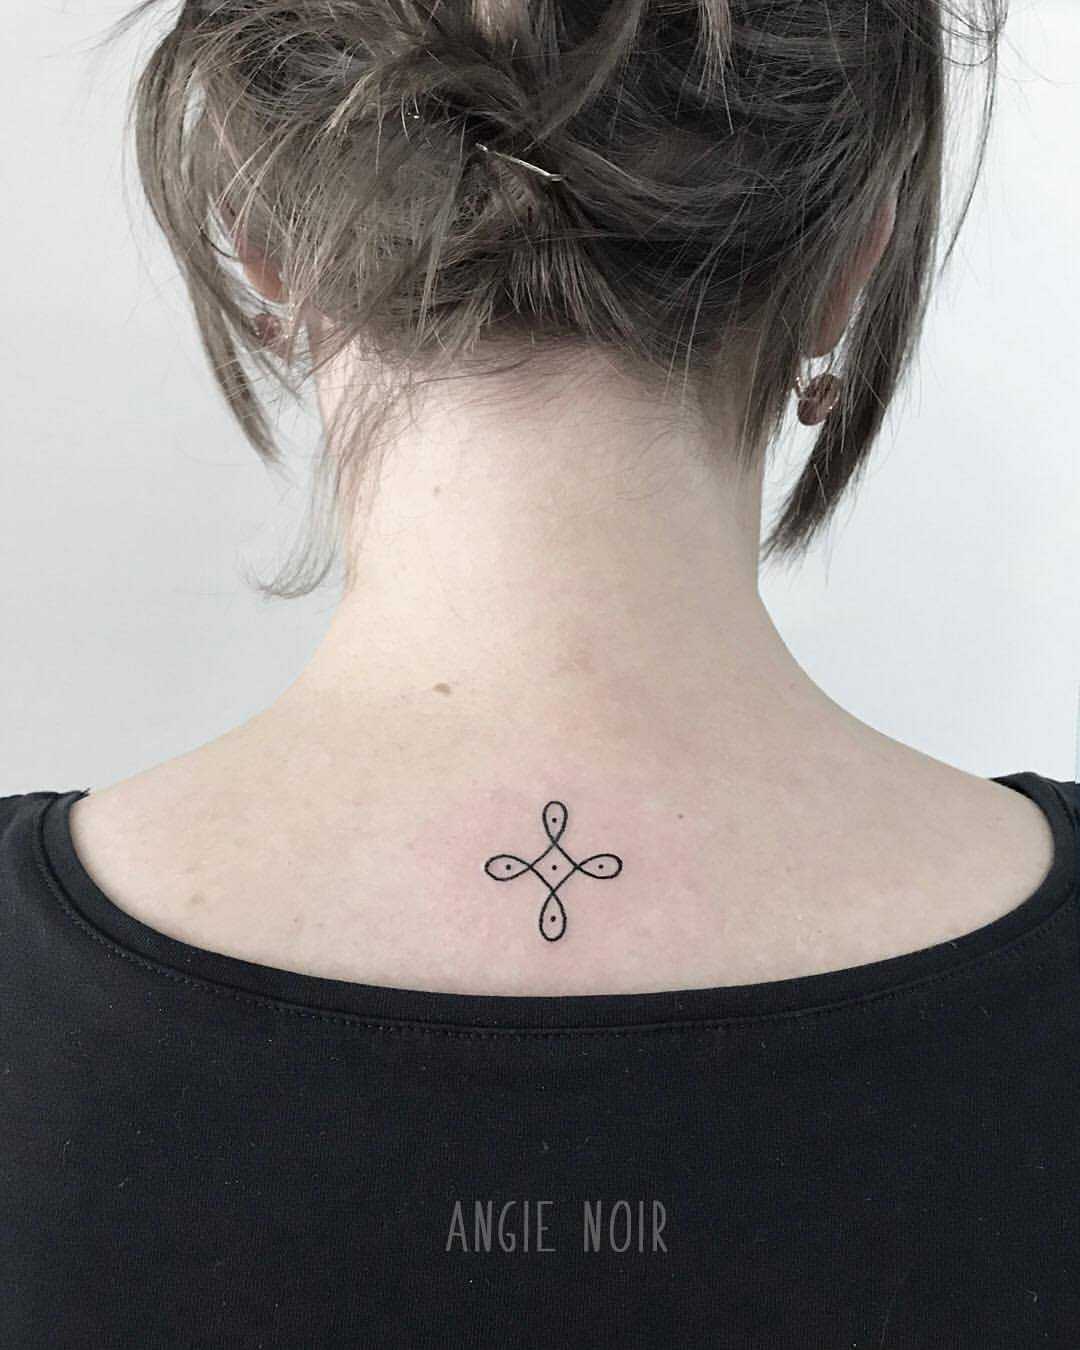 Tiny tattoo on the back by Angie Noir